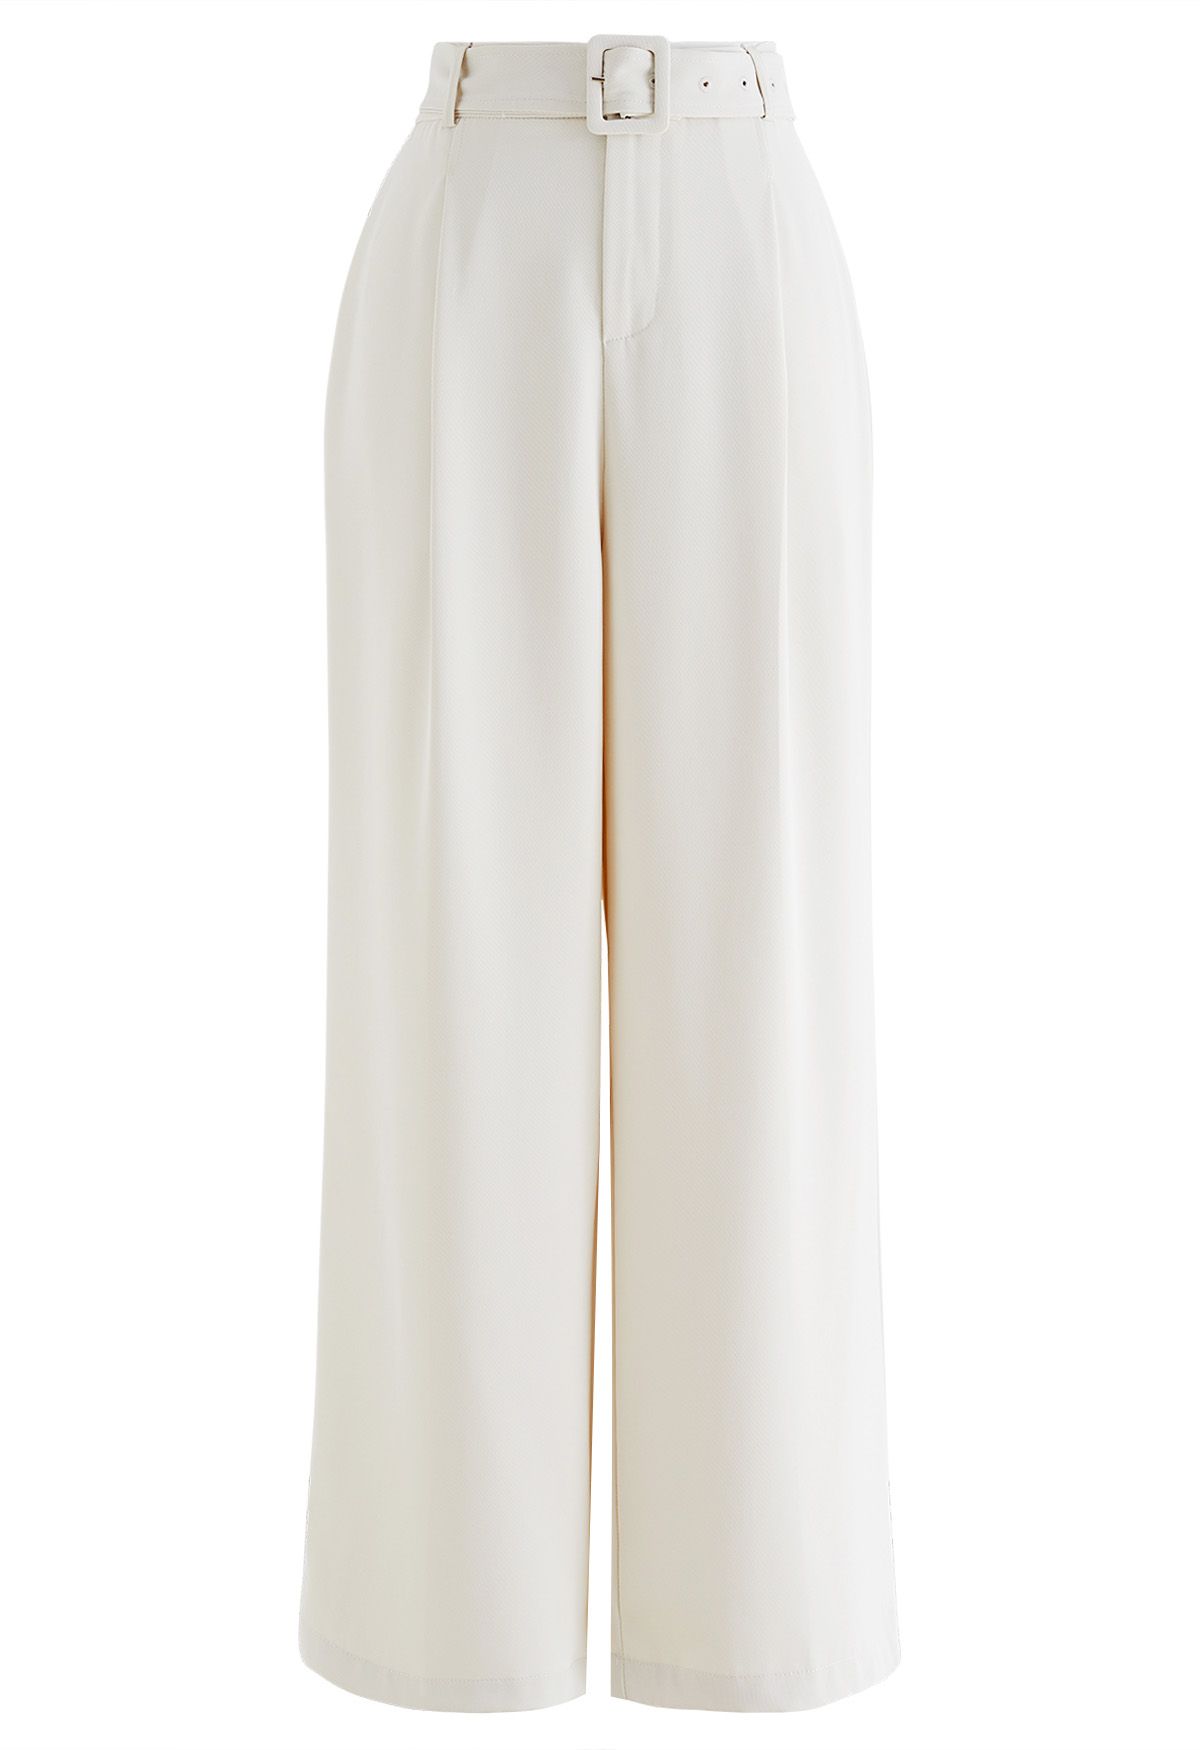 Sleek Belted Straight-Leg Pants in Ivory - Retro, Indie and Unique Fashion